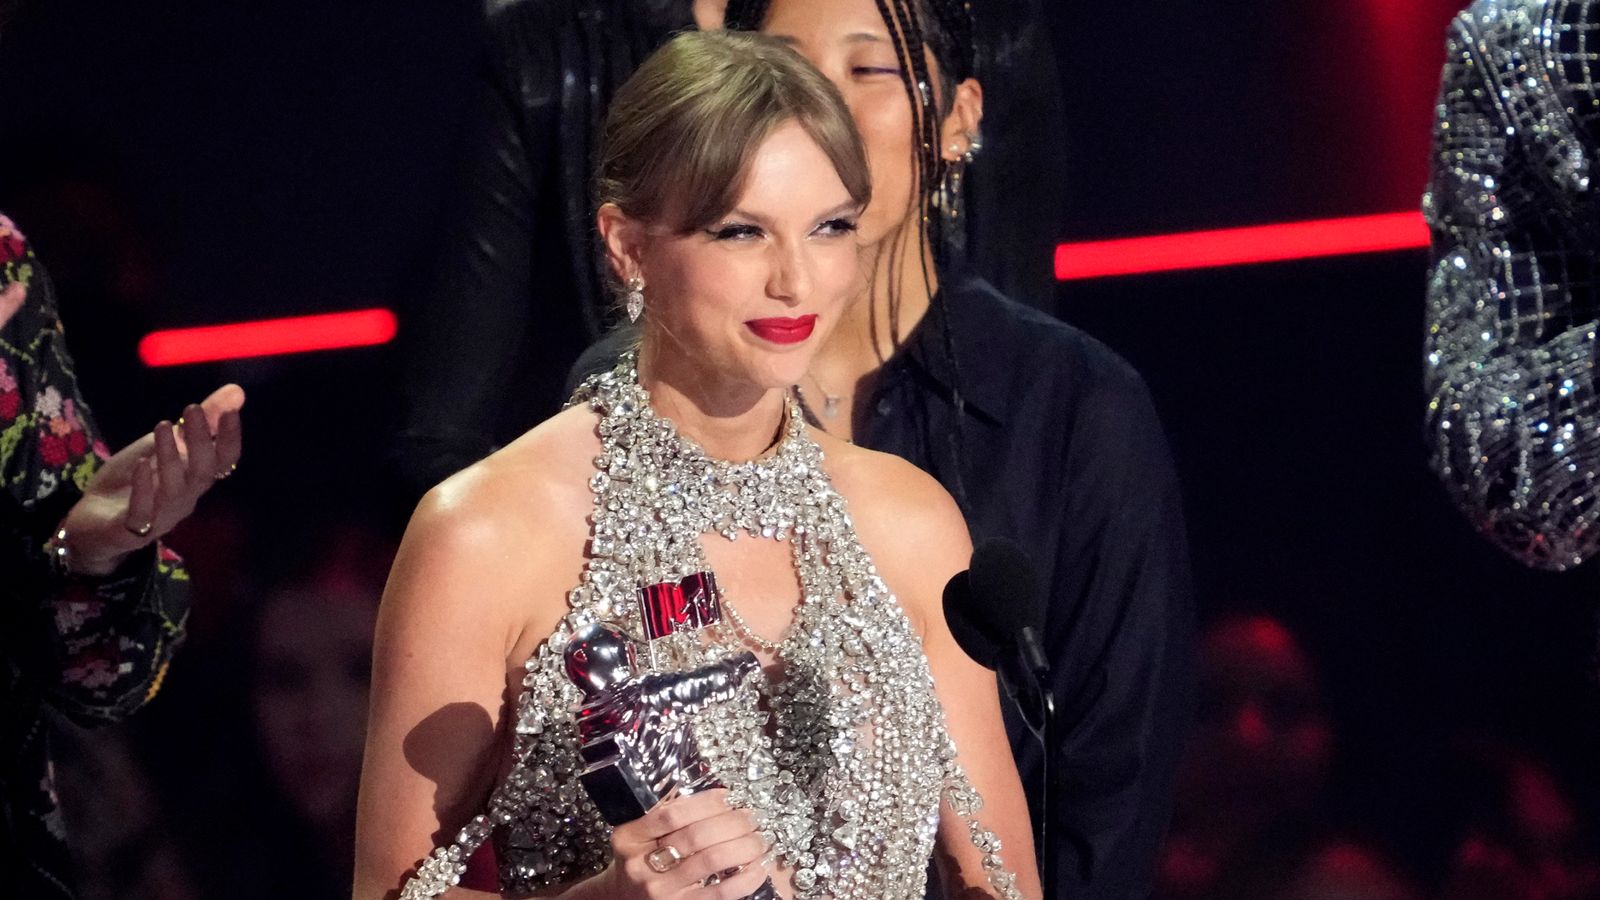 Taylor Swift becomes the first to claim top 10 slots in US charts